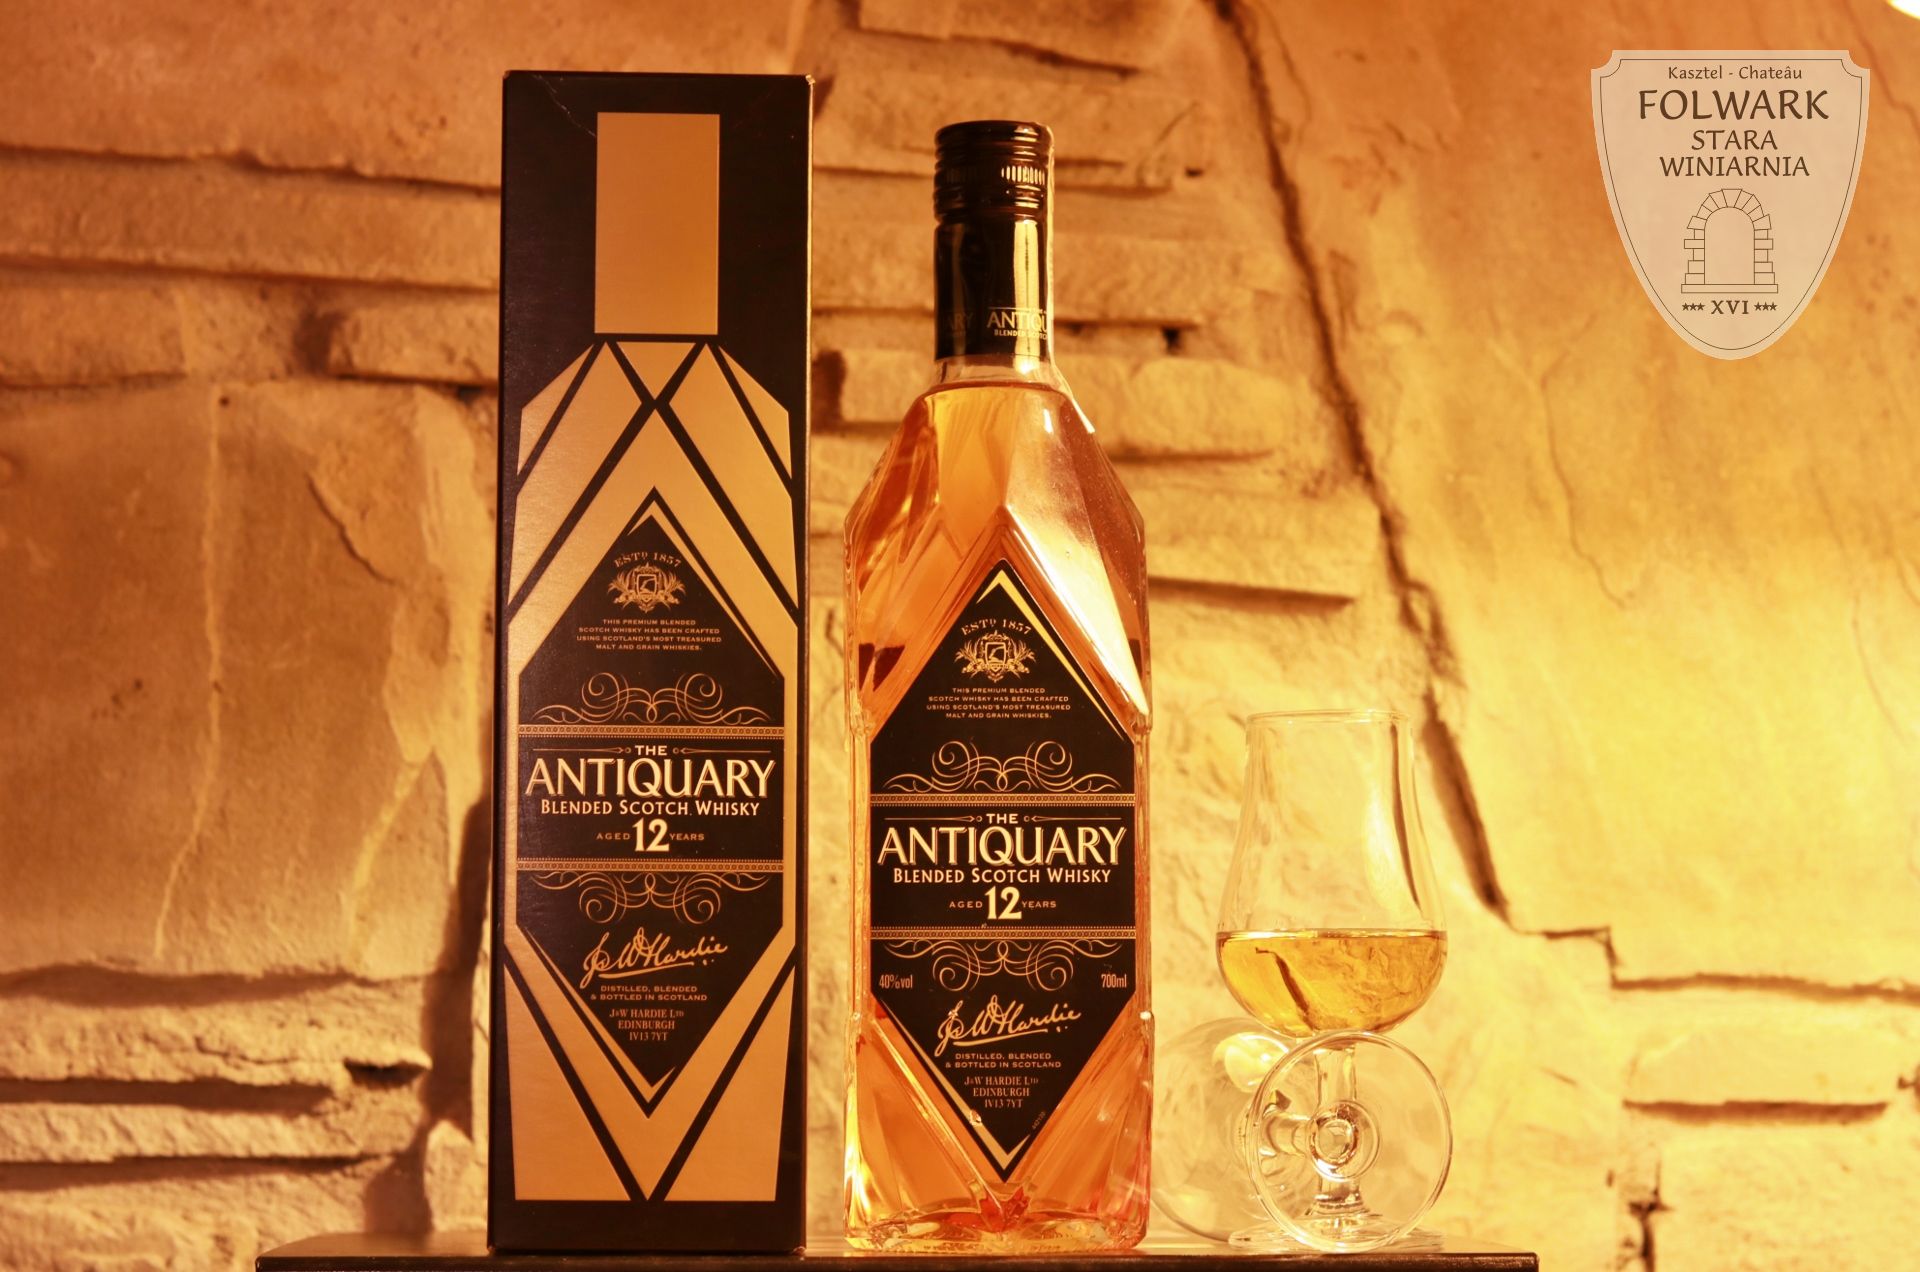 The Antiquary lubimywhisky.pl